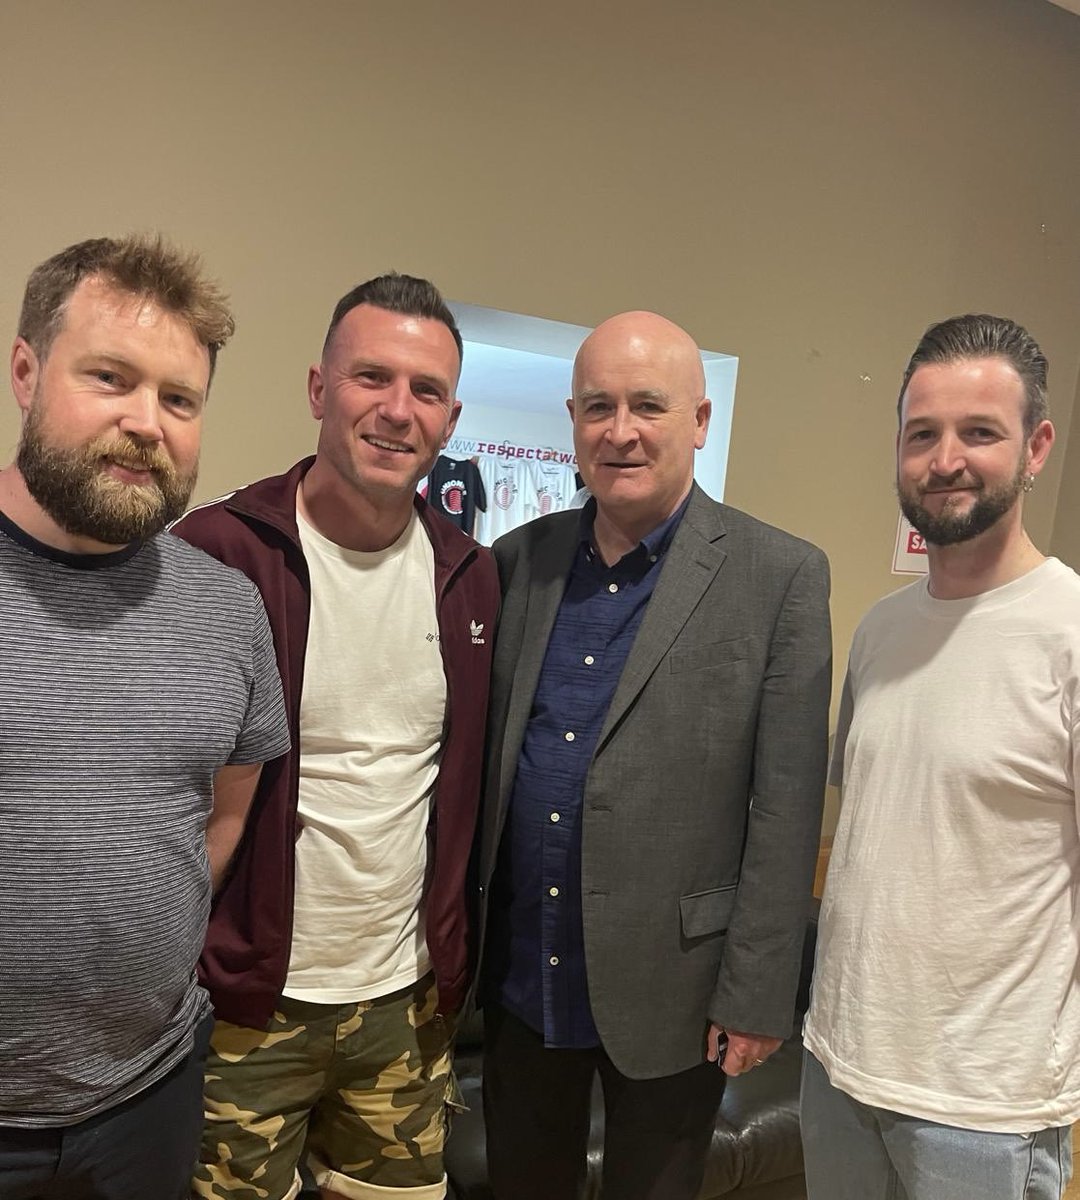 Great day of debate and discussion about trade union renewal and the continuing fight for respect at work. And Mick Lynch got to have his picture taken with CWU activists Robert, Brian and Sean. Well done to the organisers @TressellFest #TressellFest #accessorganiseunionise